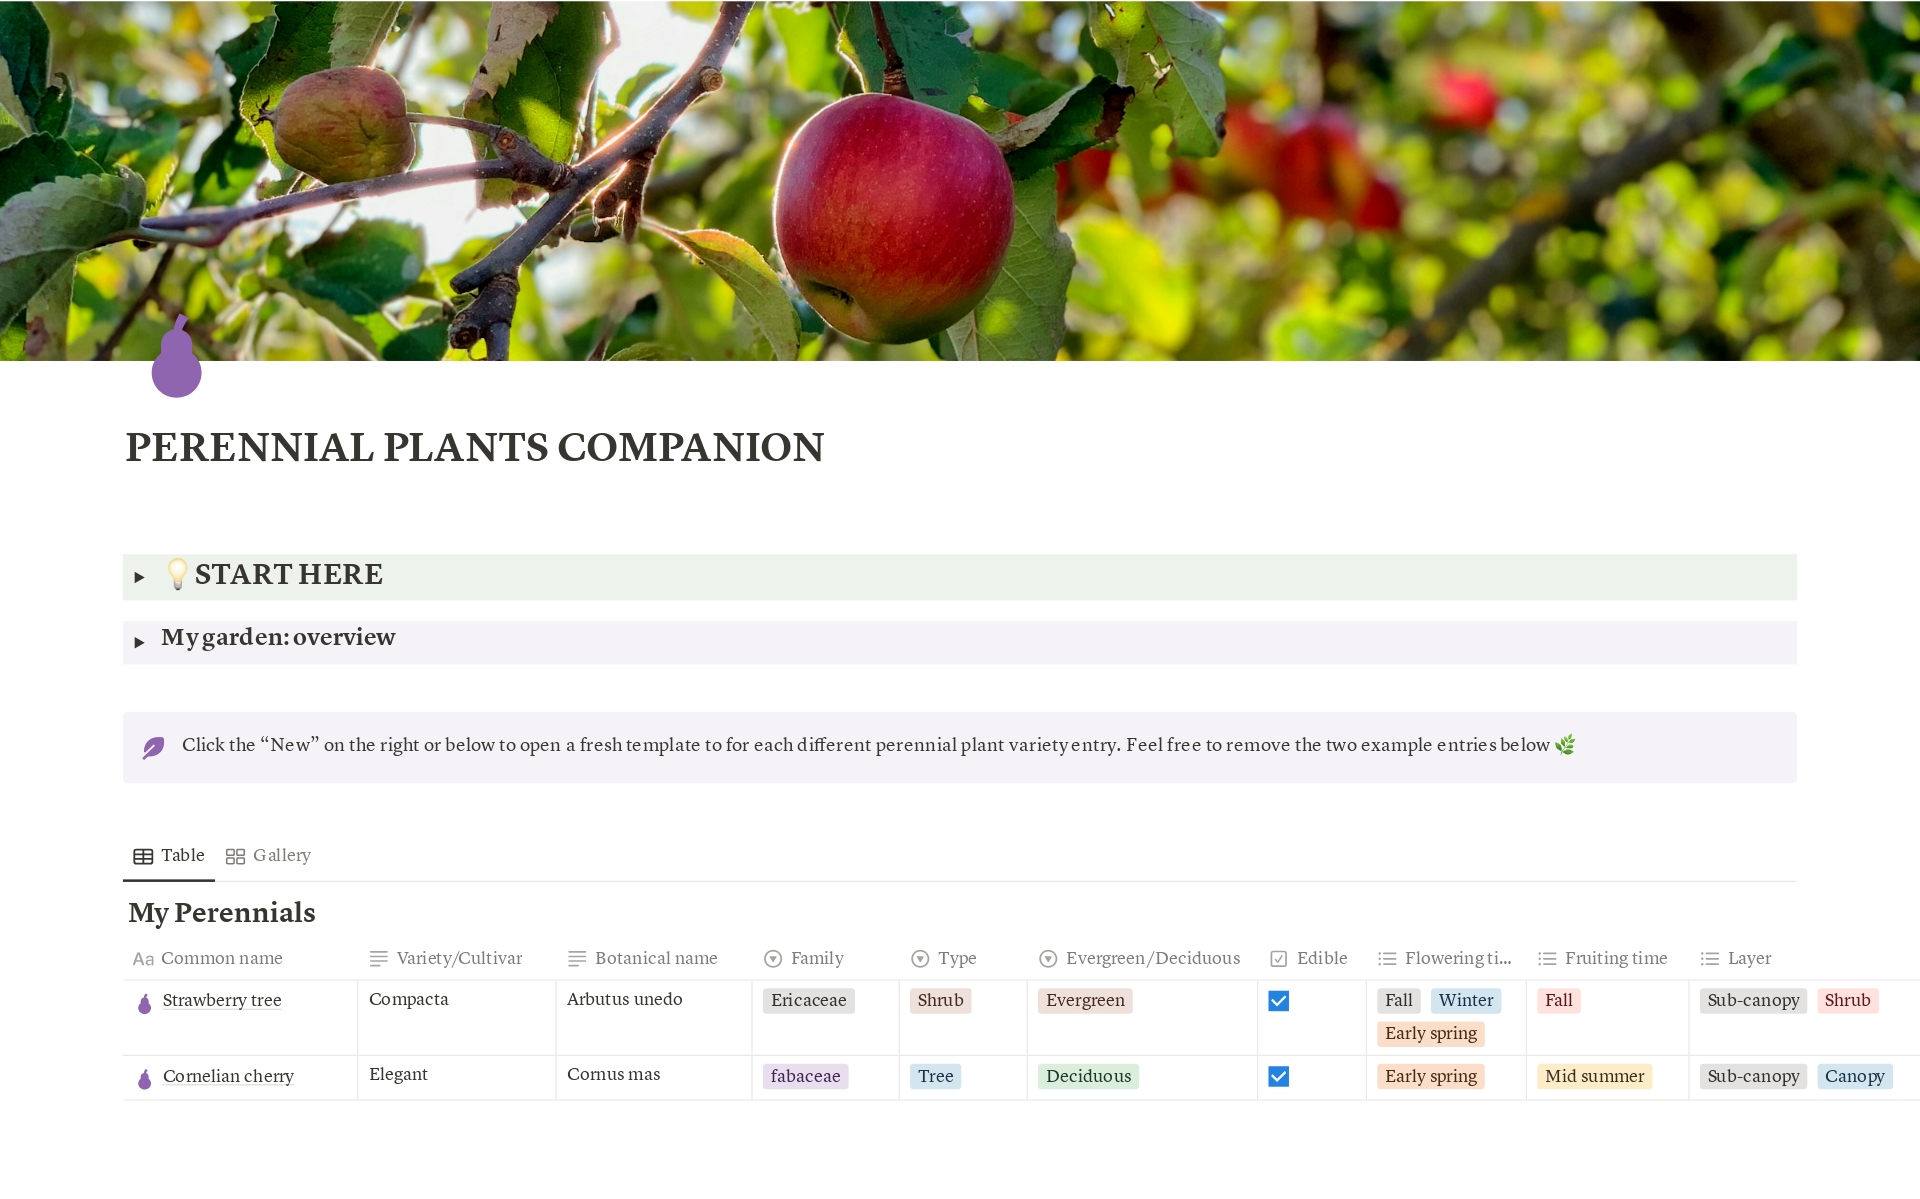 Inspired by the practices of Horticulturists, Botanists, and gardening professionals. I've curated the most useful information for you to track so that you learn how to be the expert of your plants and garden 🌿
